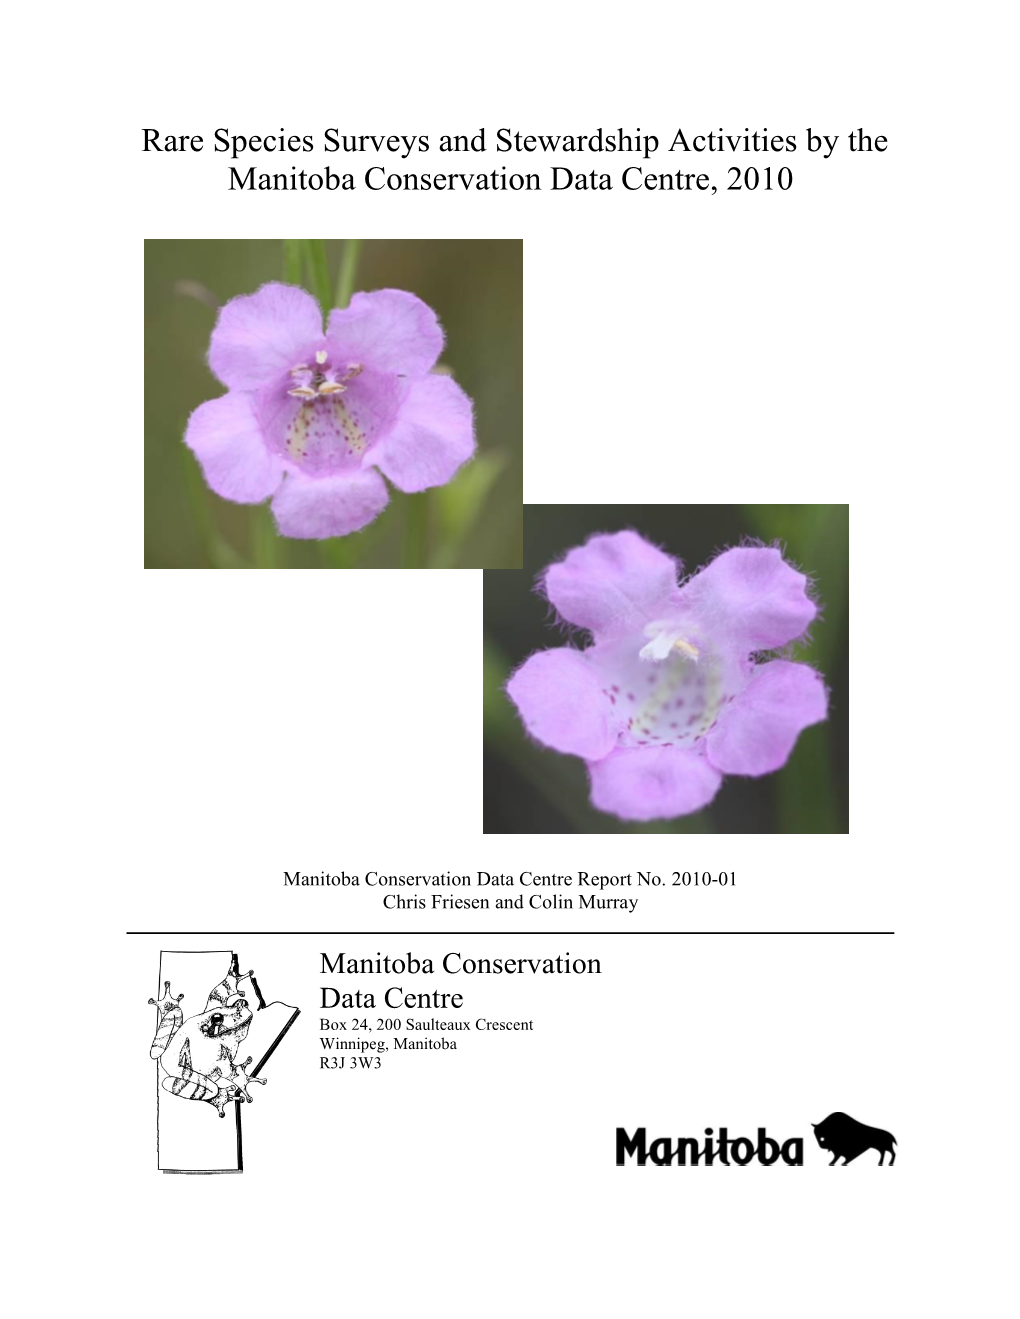 Rare Plant Surveys and Stewardship Activities by the Manitoba Conservation Data Centre, 2007